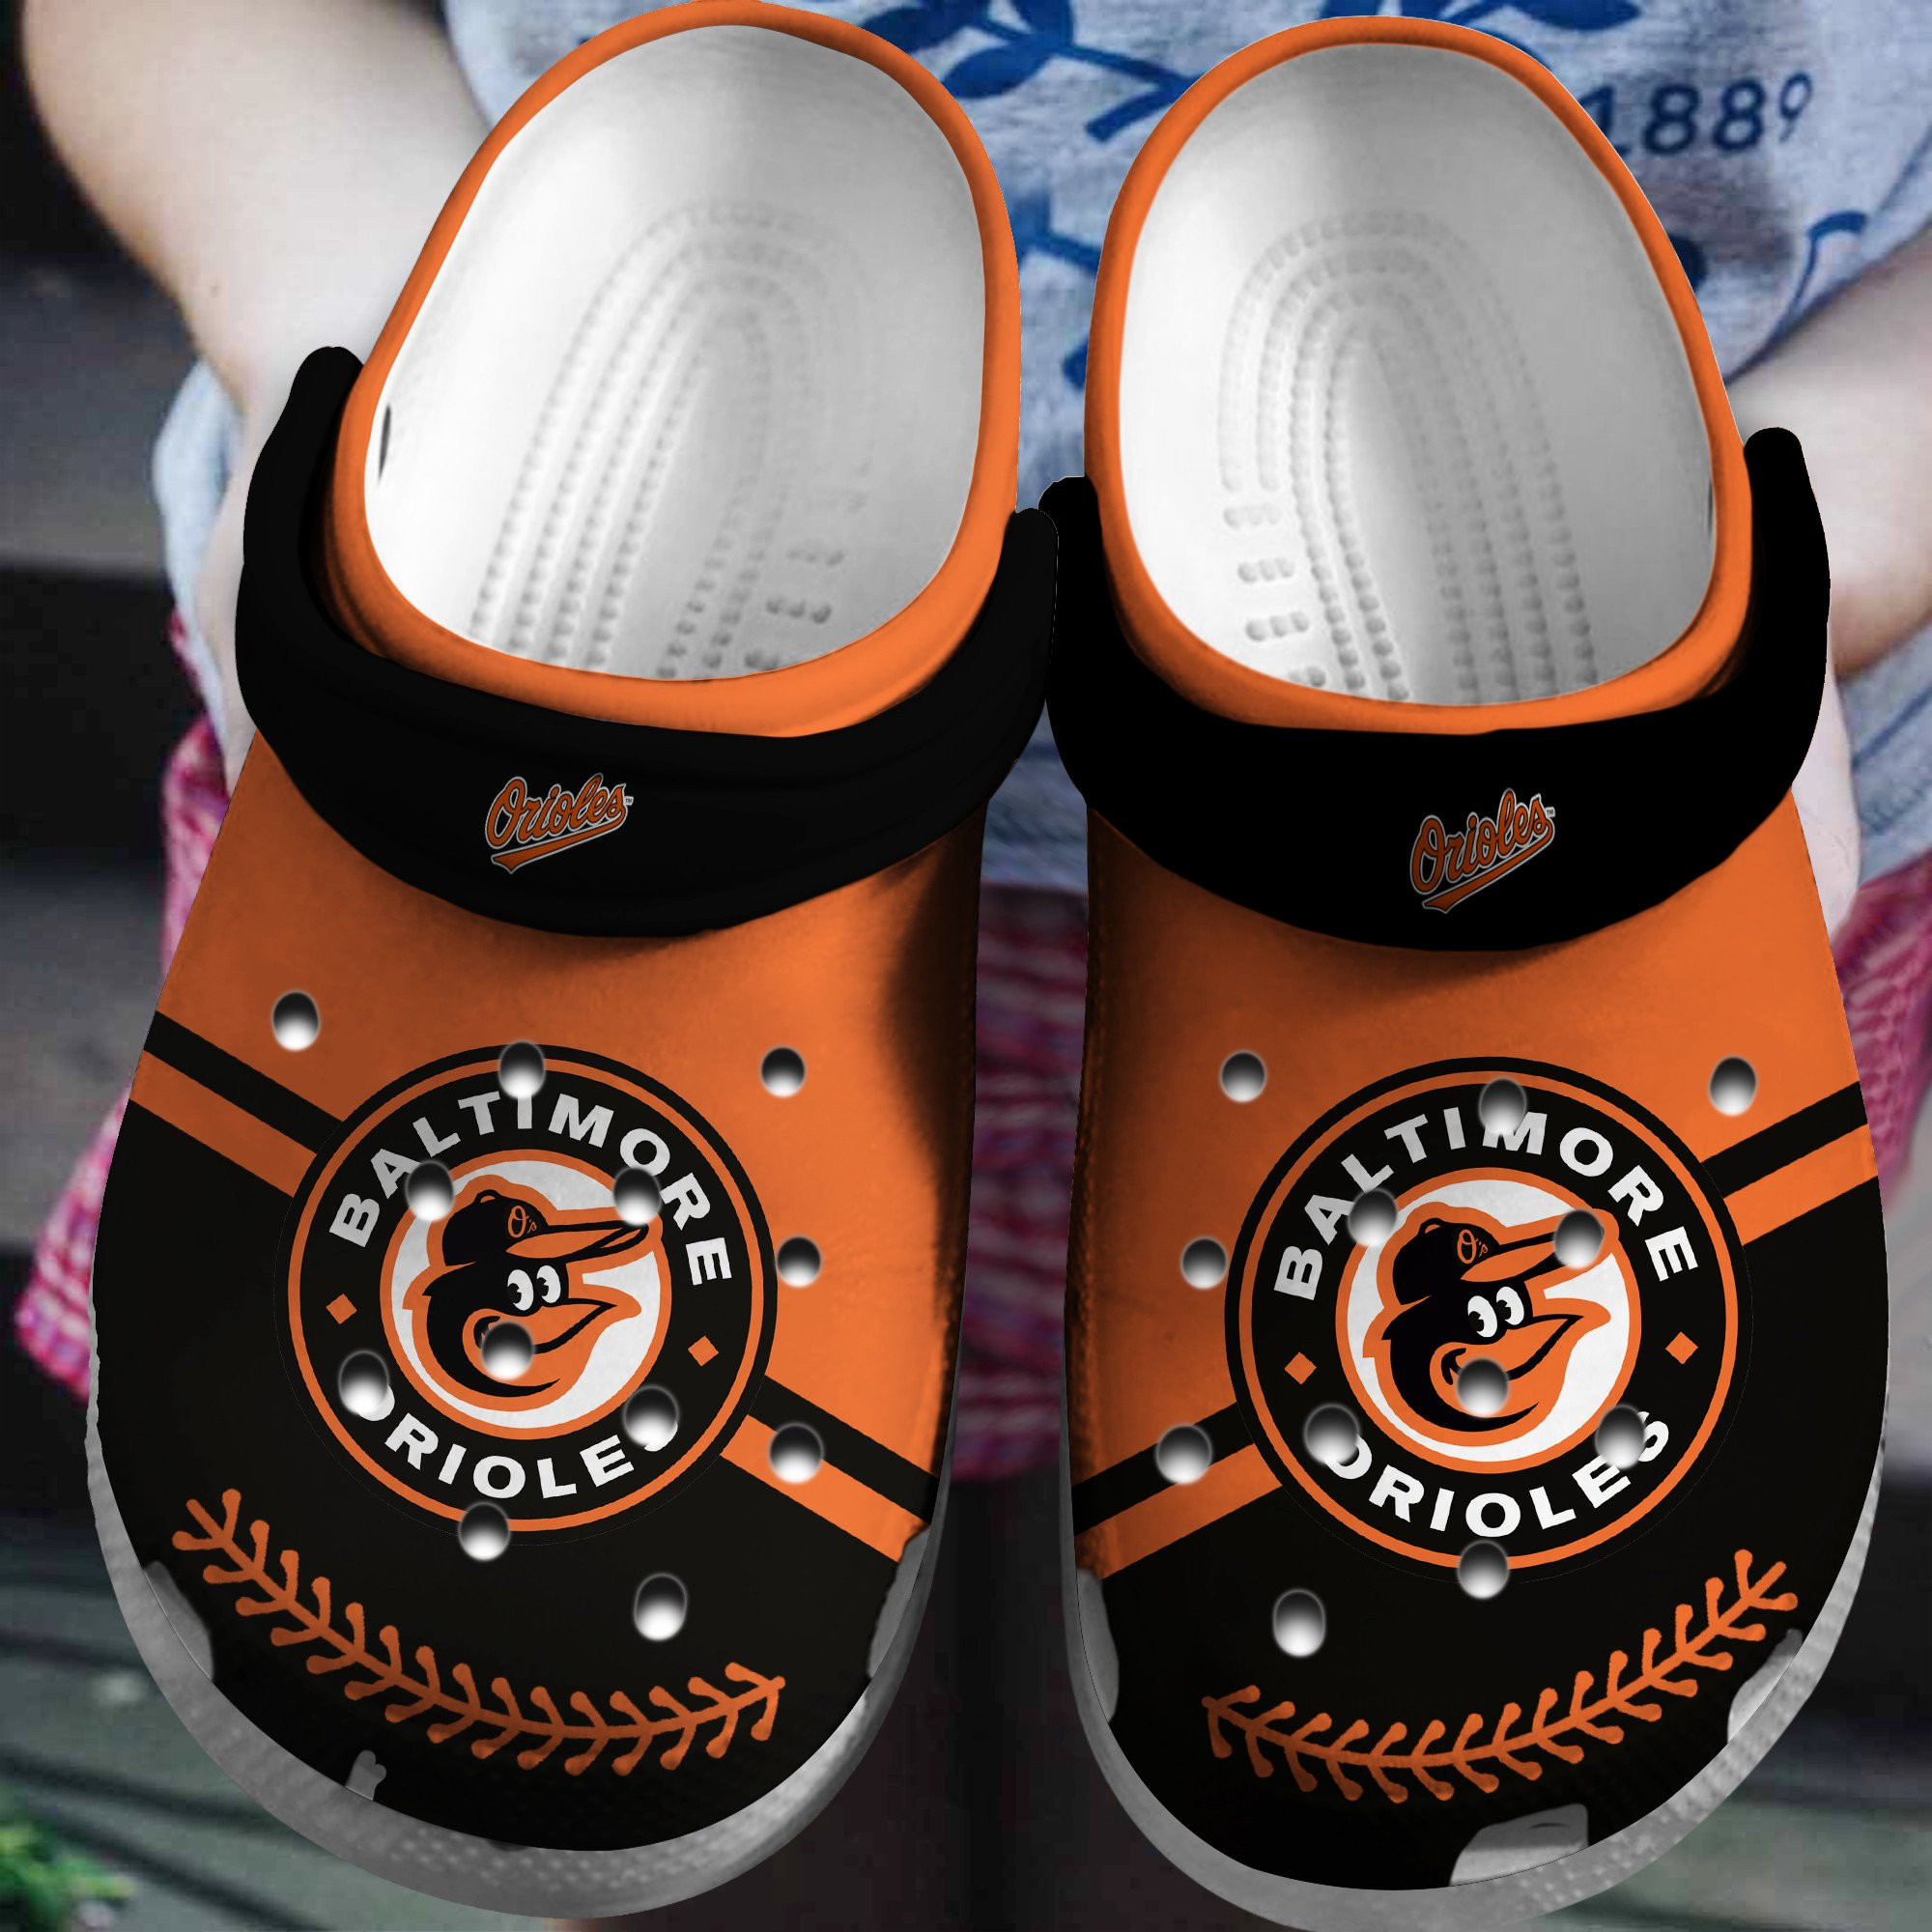 Hot Mlb Team Baltimore Orioles Black-Orange Crocs Clog Shoesshoes Trusted Shopping Online In The World